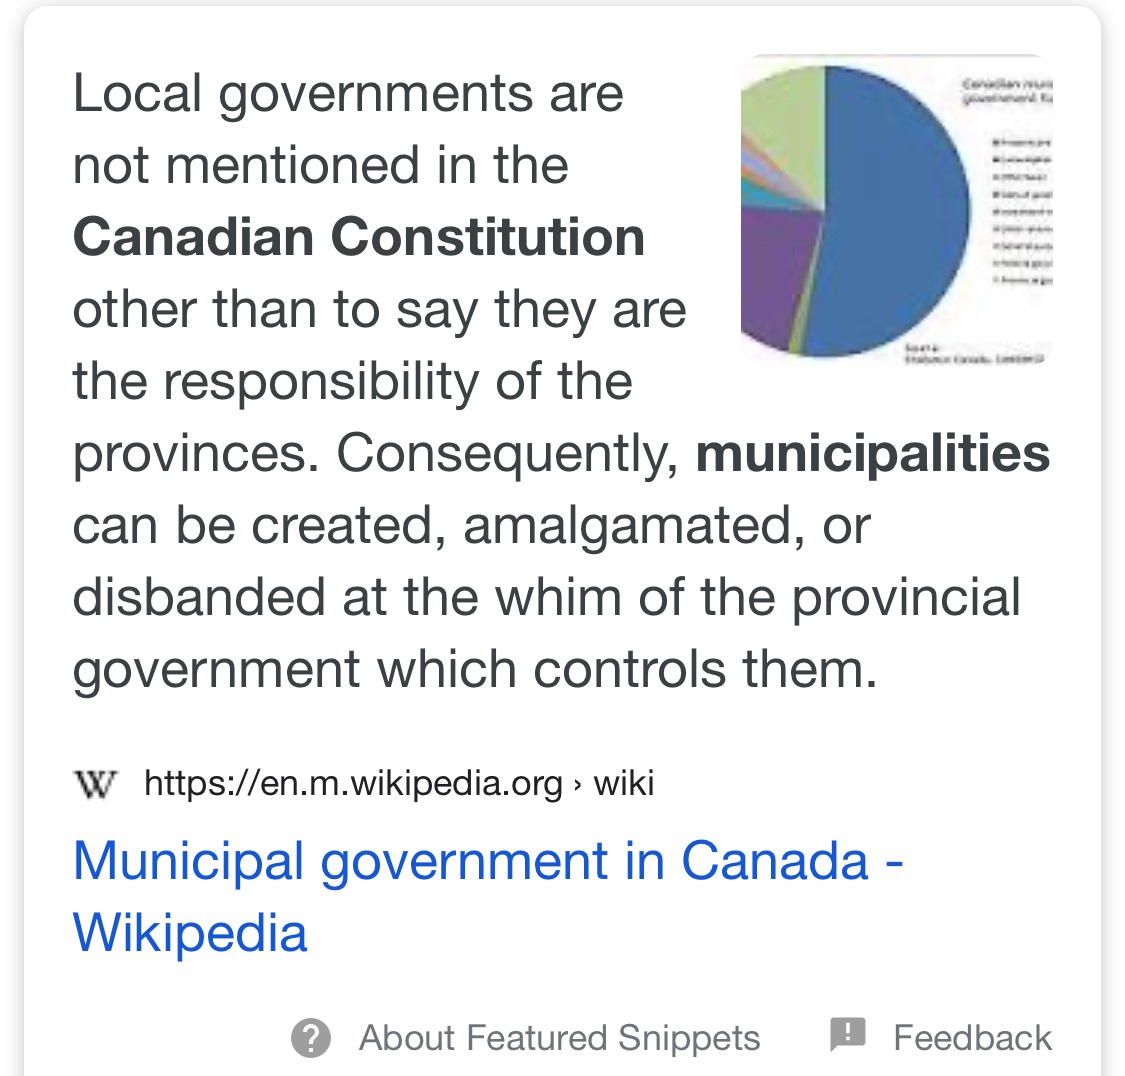 Municipalities in Canada are literally a creature of the province. The province does what it wants, and that often means sitting on draft legislation for years until it “releases” it from review.